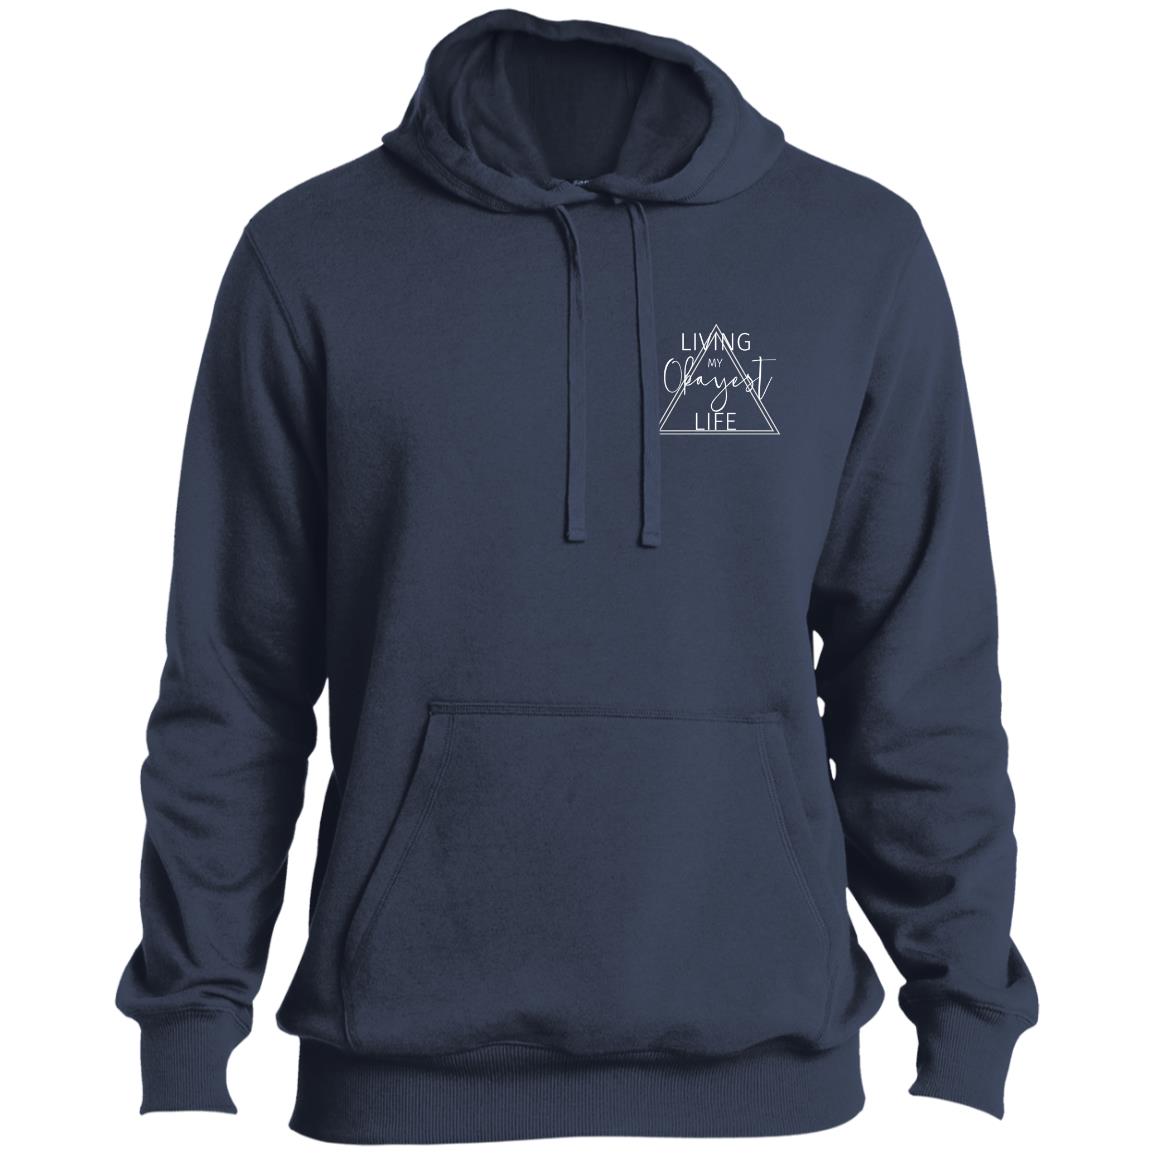 Okayest Life Triangle Tall Pullover Hoodie